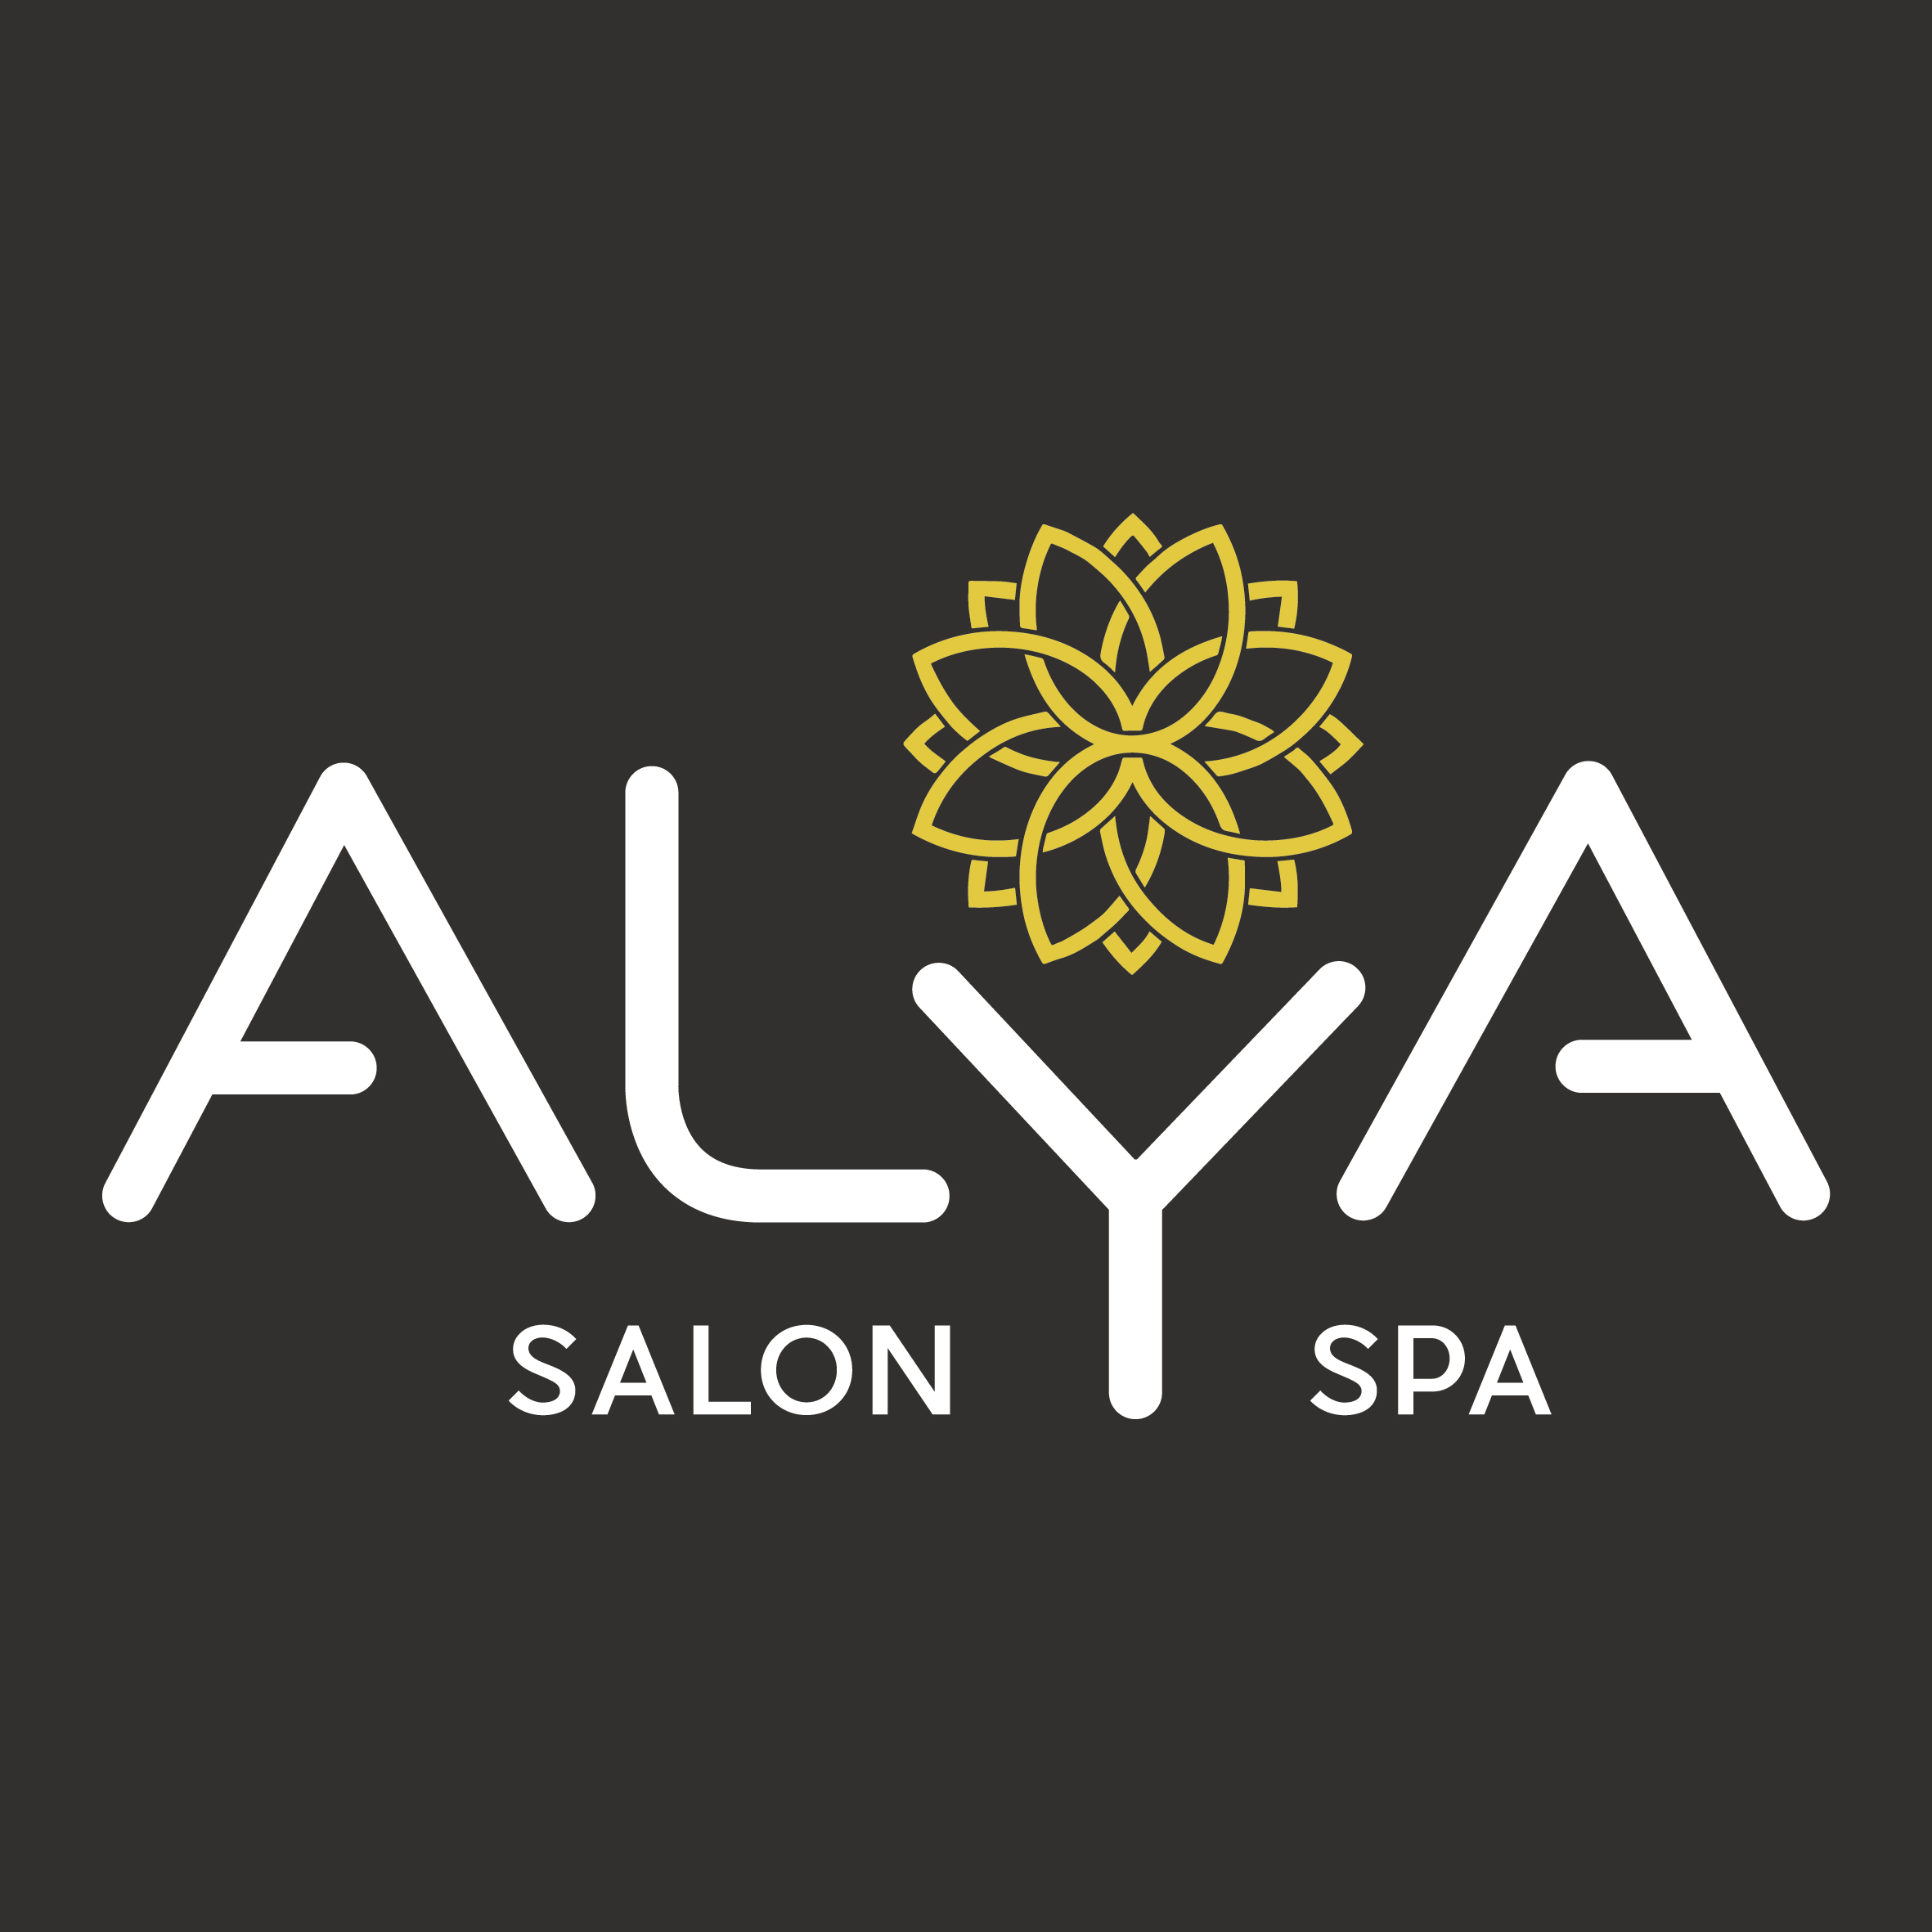 Vienna Salon & Spa - We have Hair appointment Openings Available